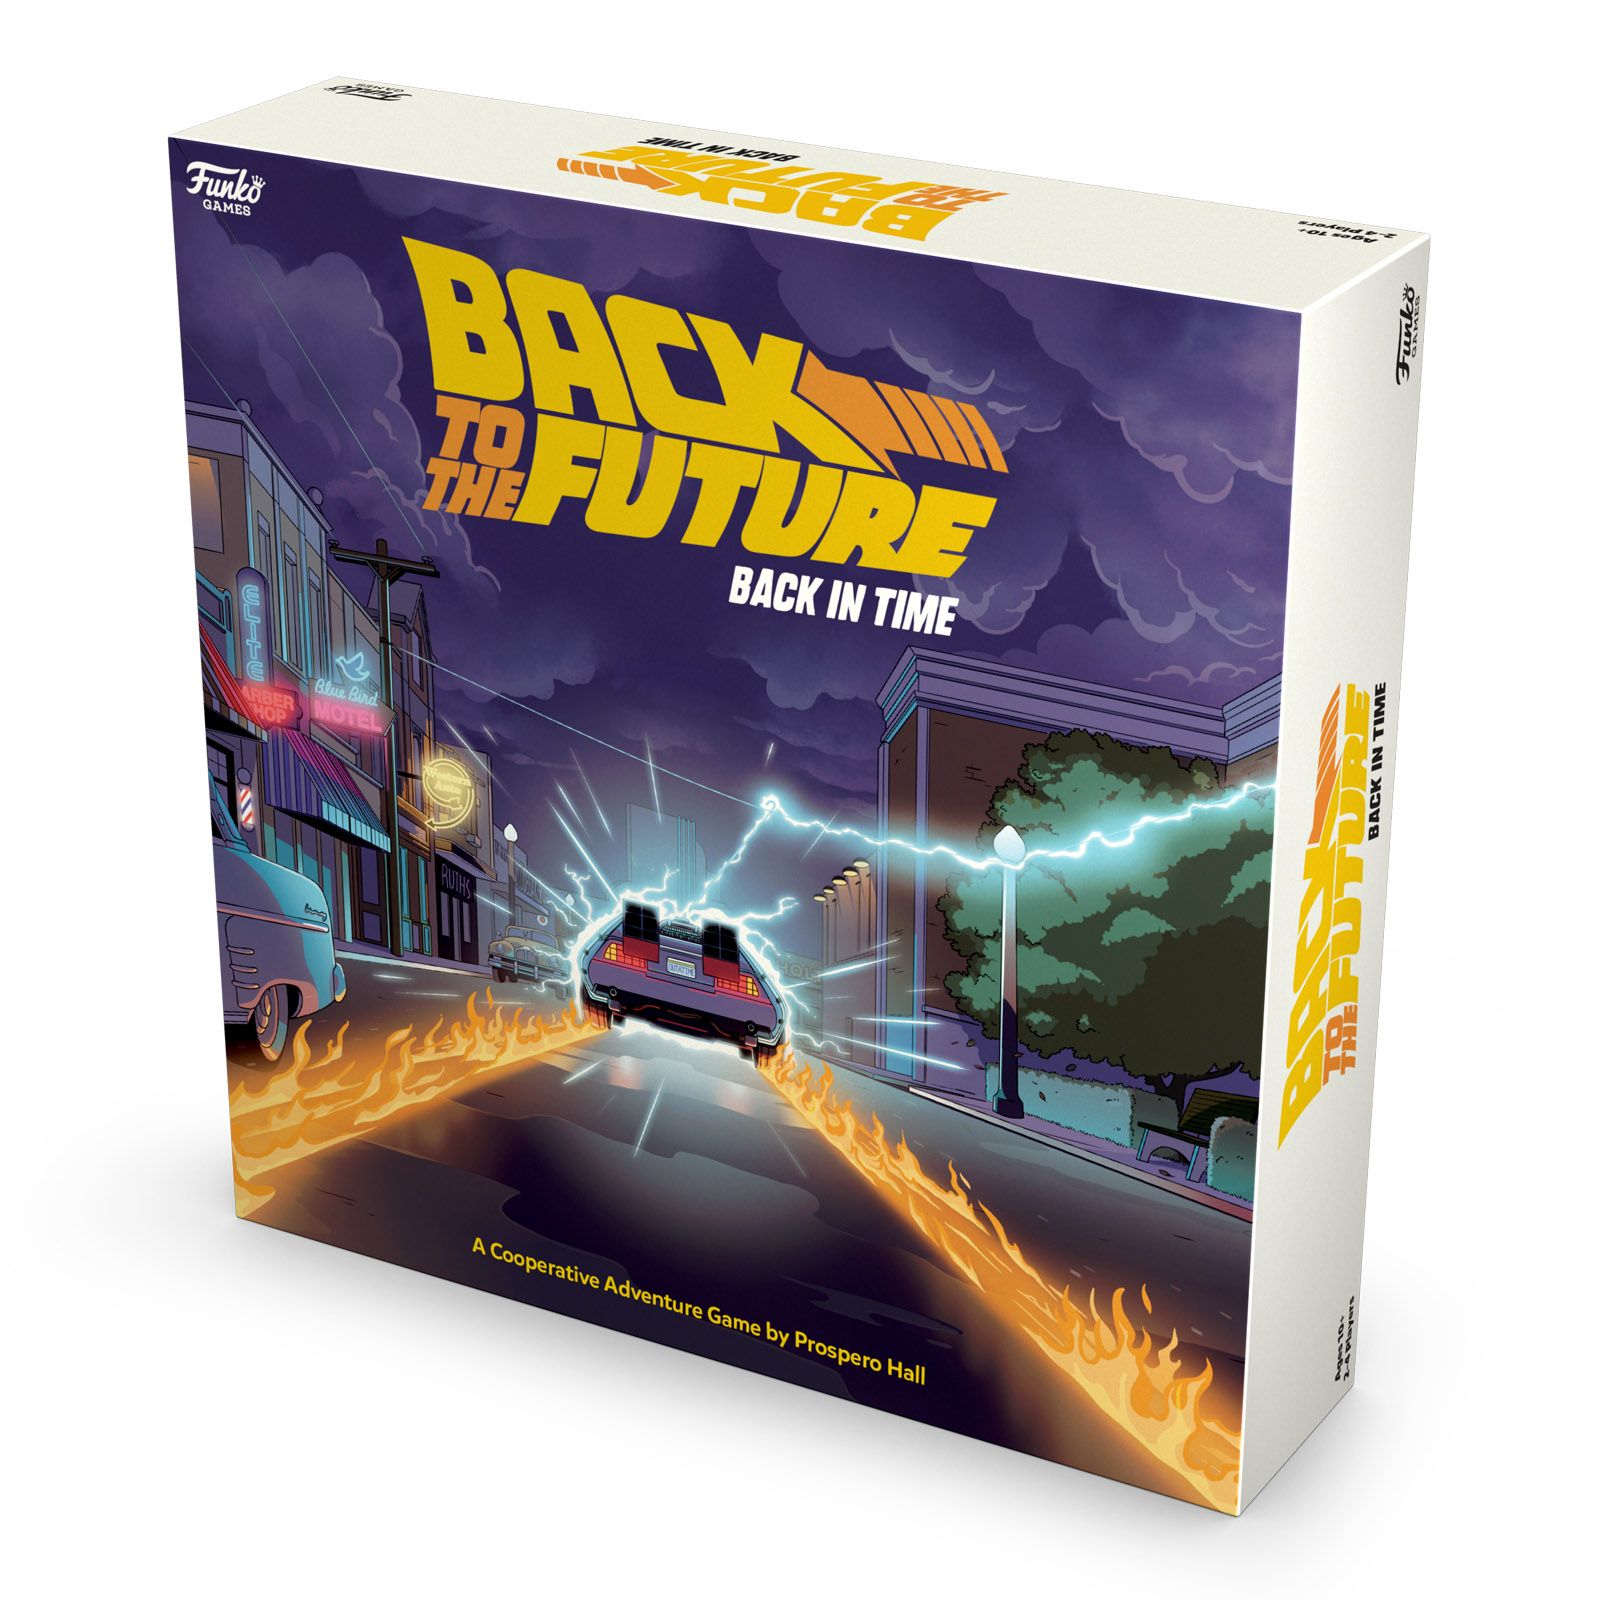 Funko Games Announces Back to the Future: Back in Time Board Game [EXCLUSIVE]